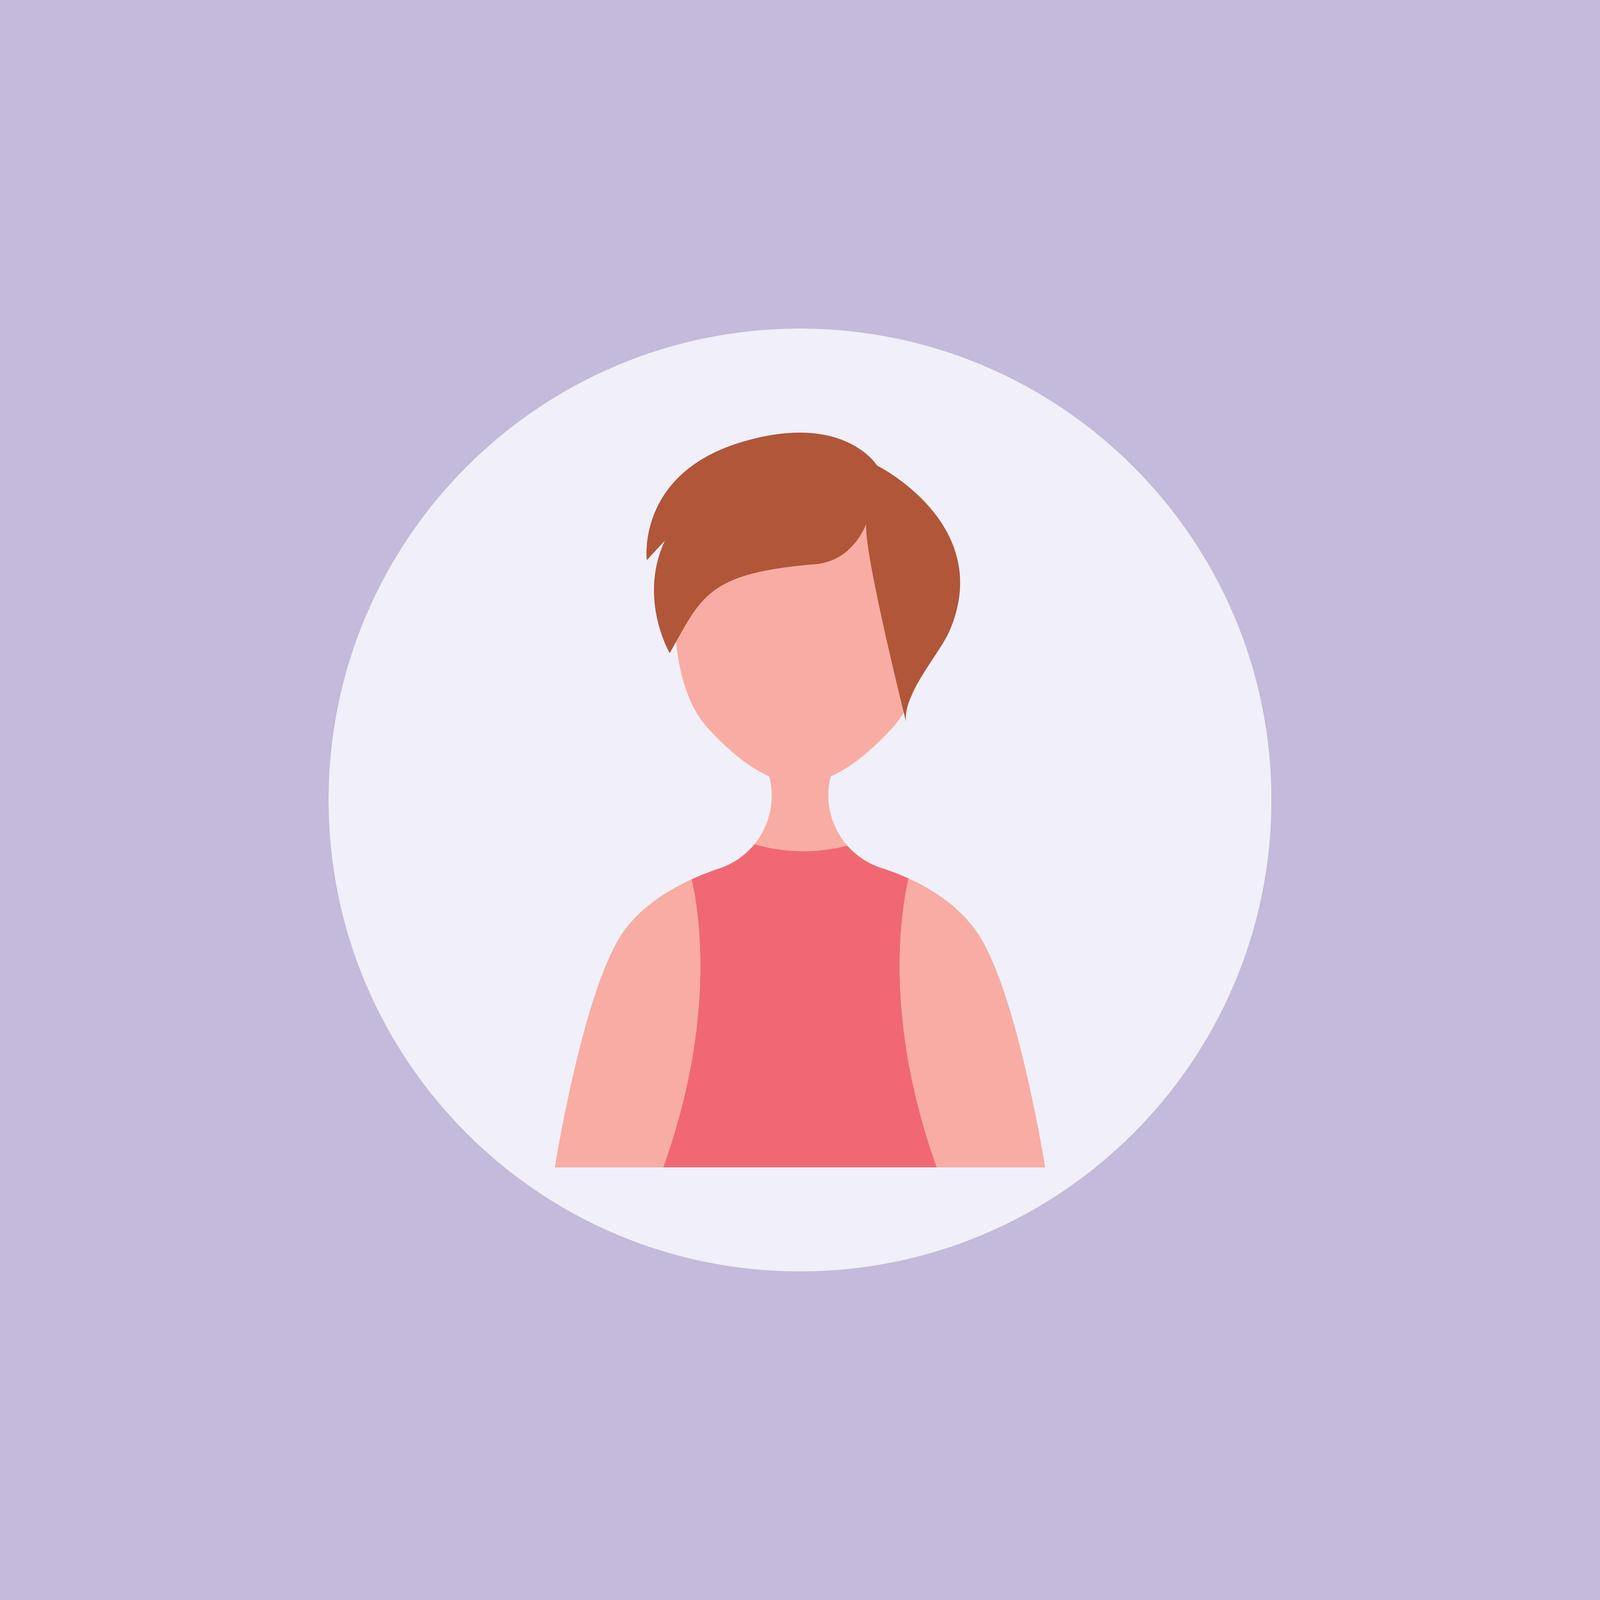 Character people on video conference cartoon flat design